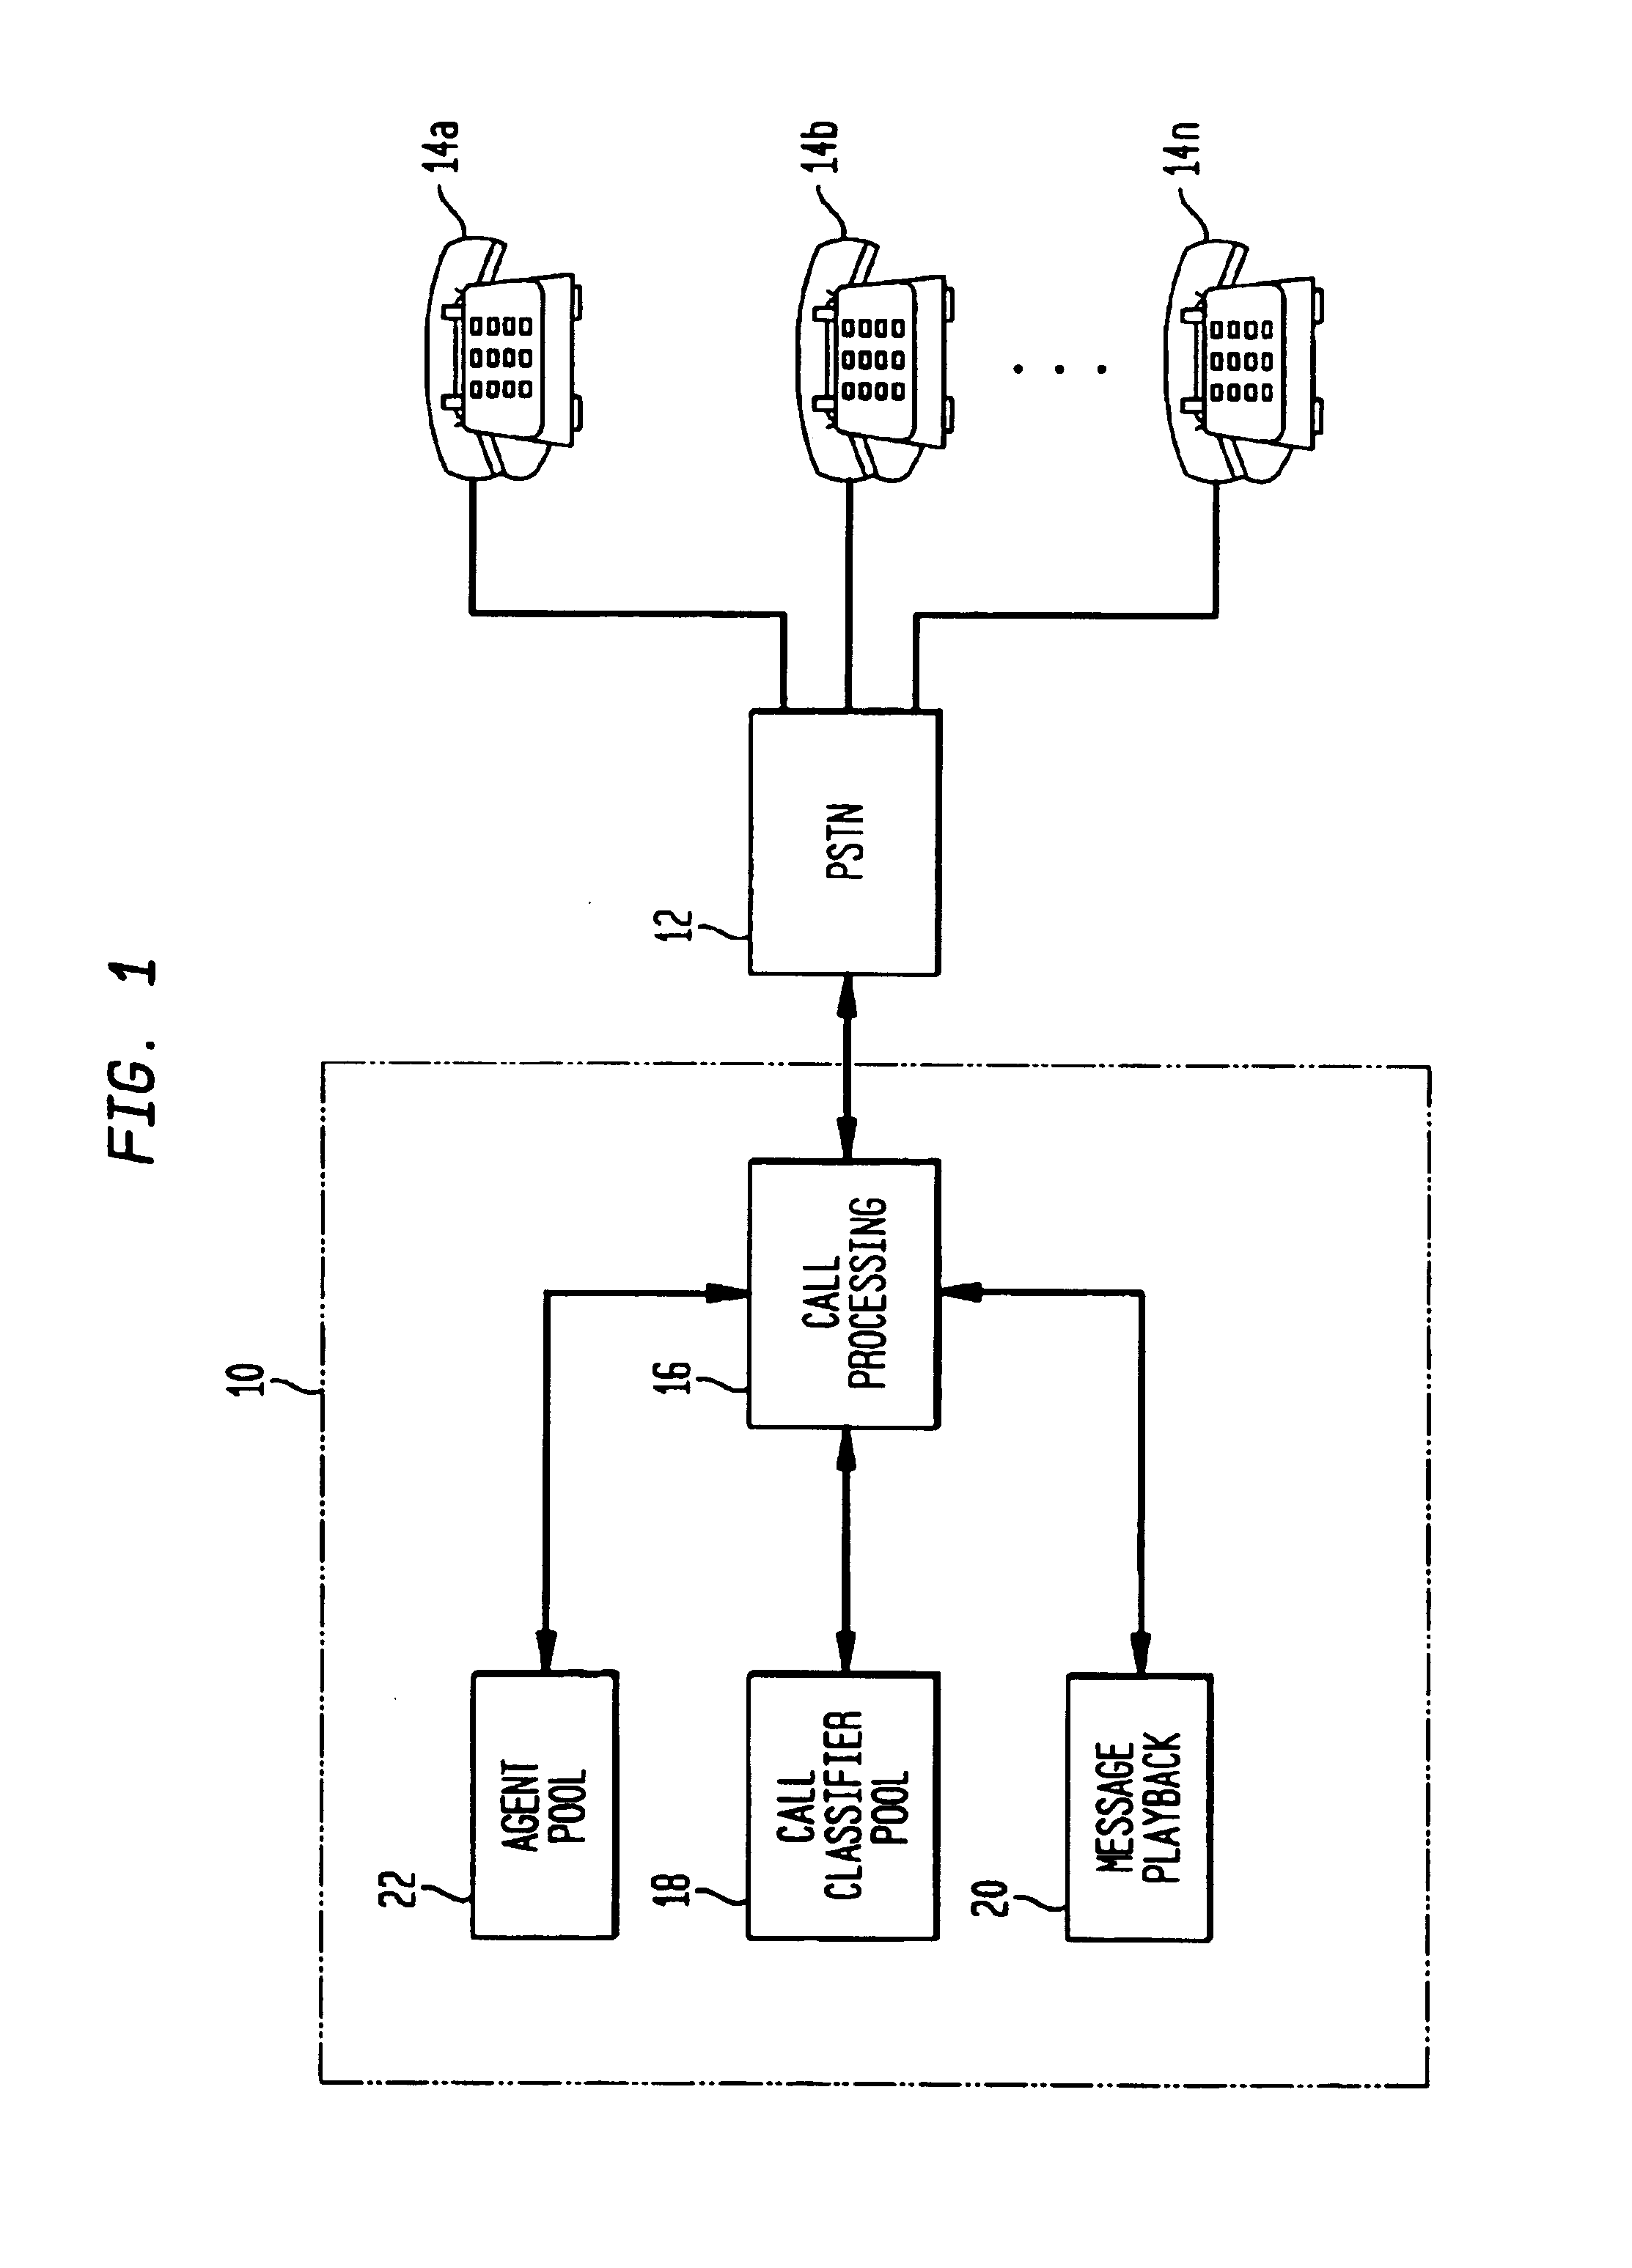 Method and apparatus for generating automatic greetings in a call center